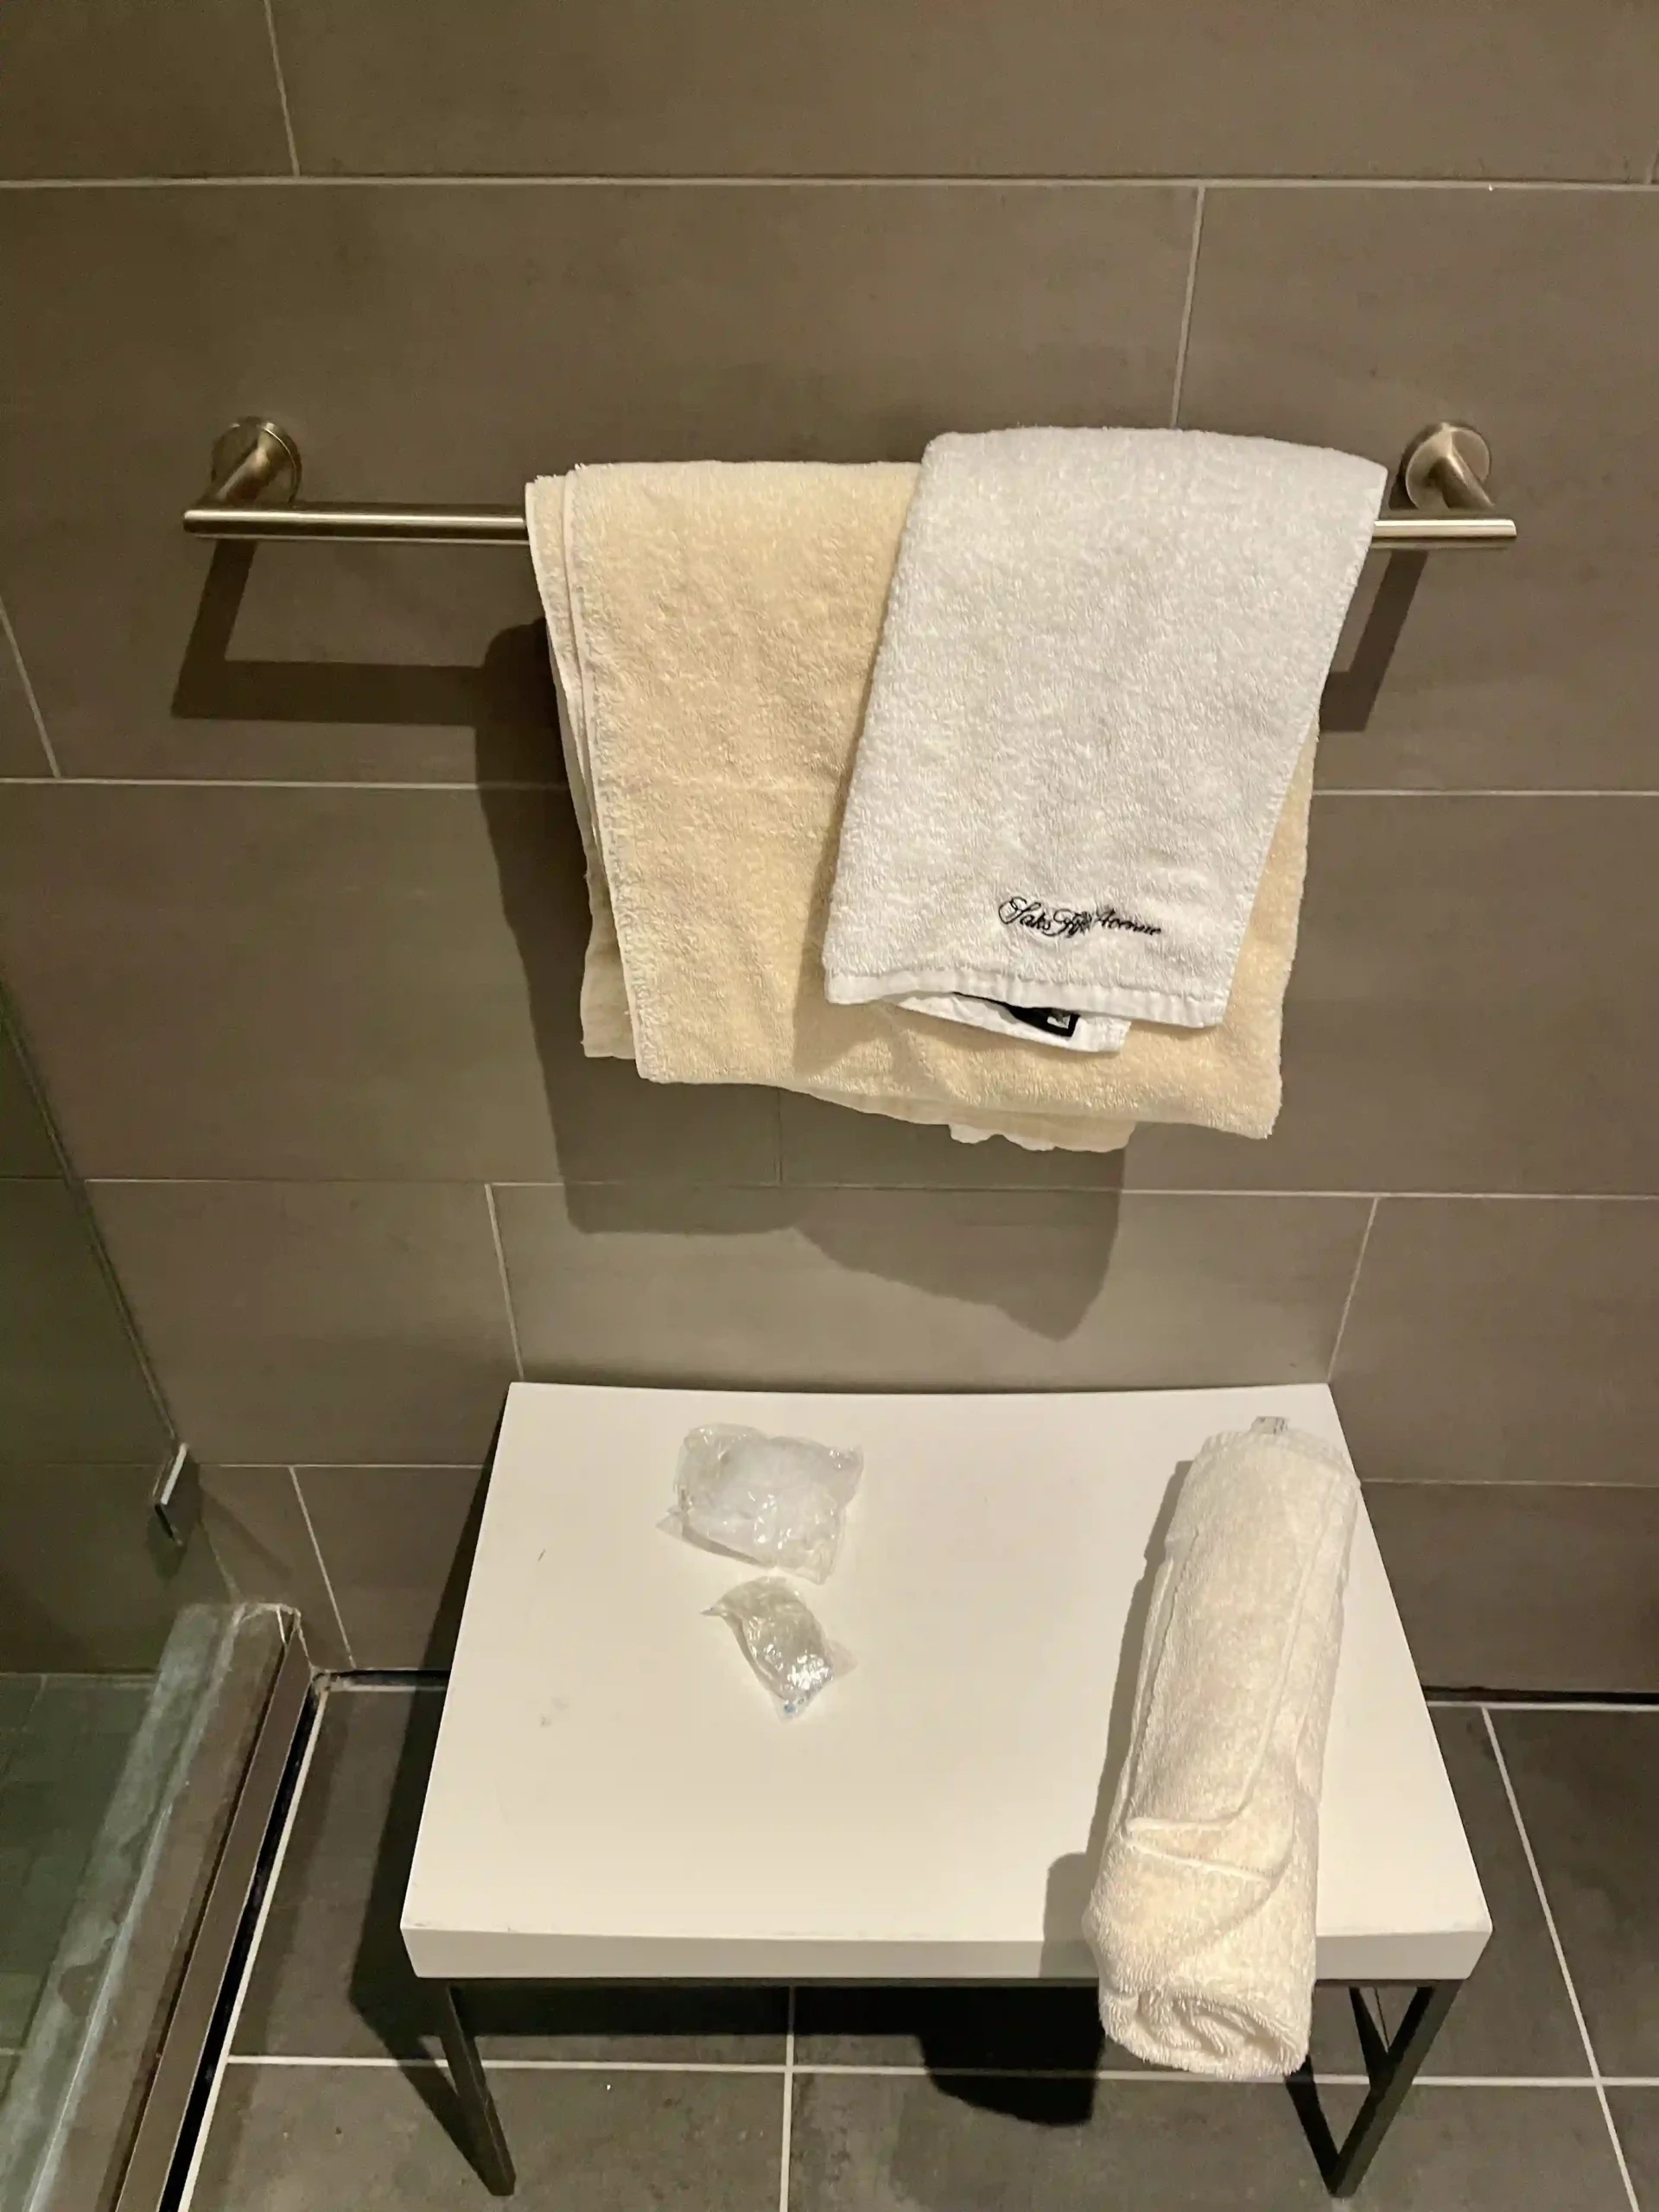 a towel rack with towels on it